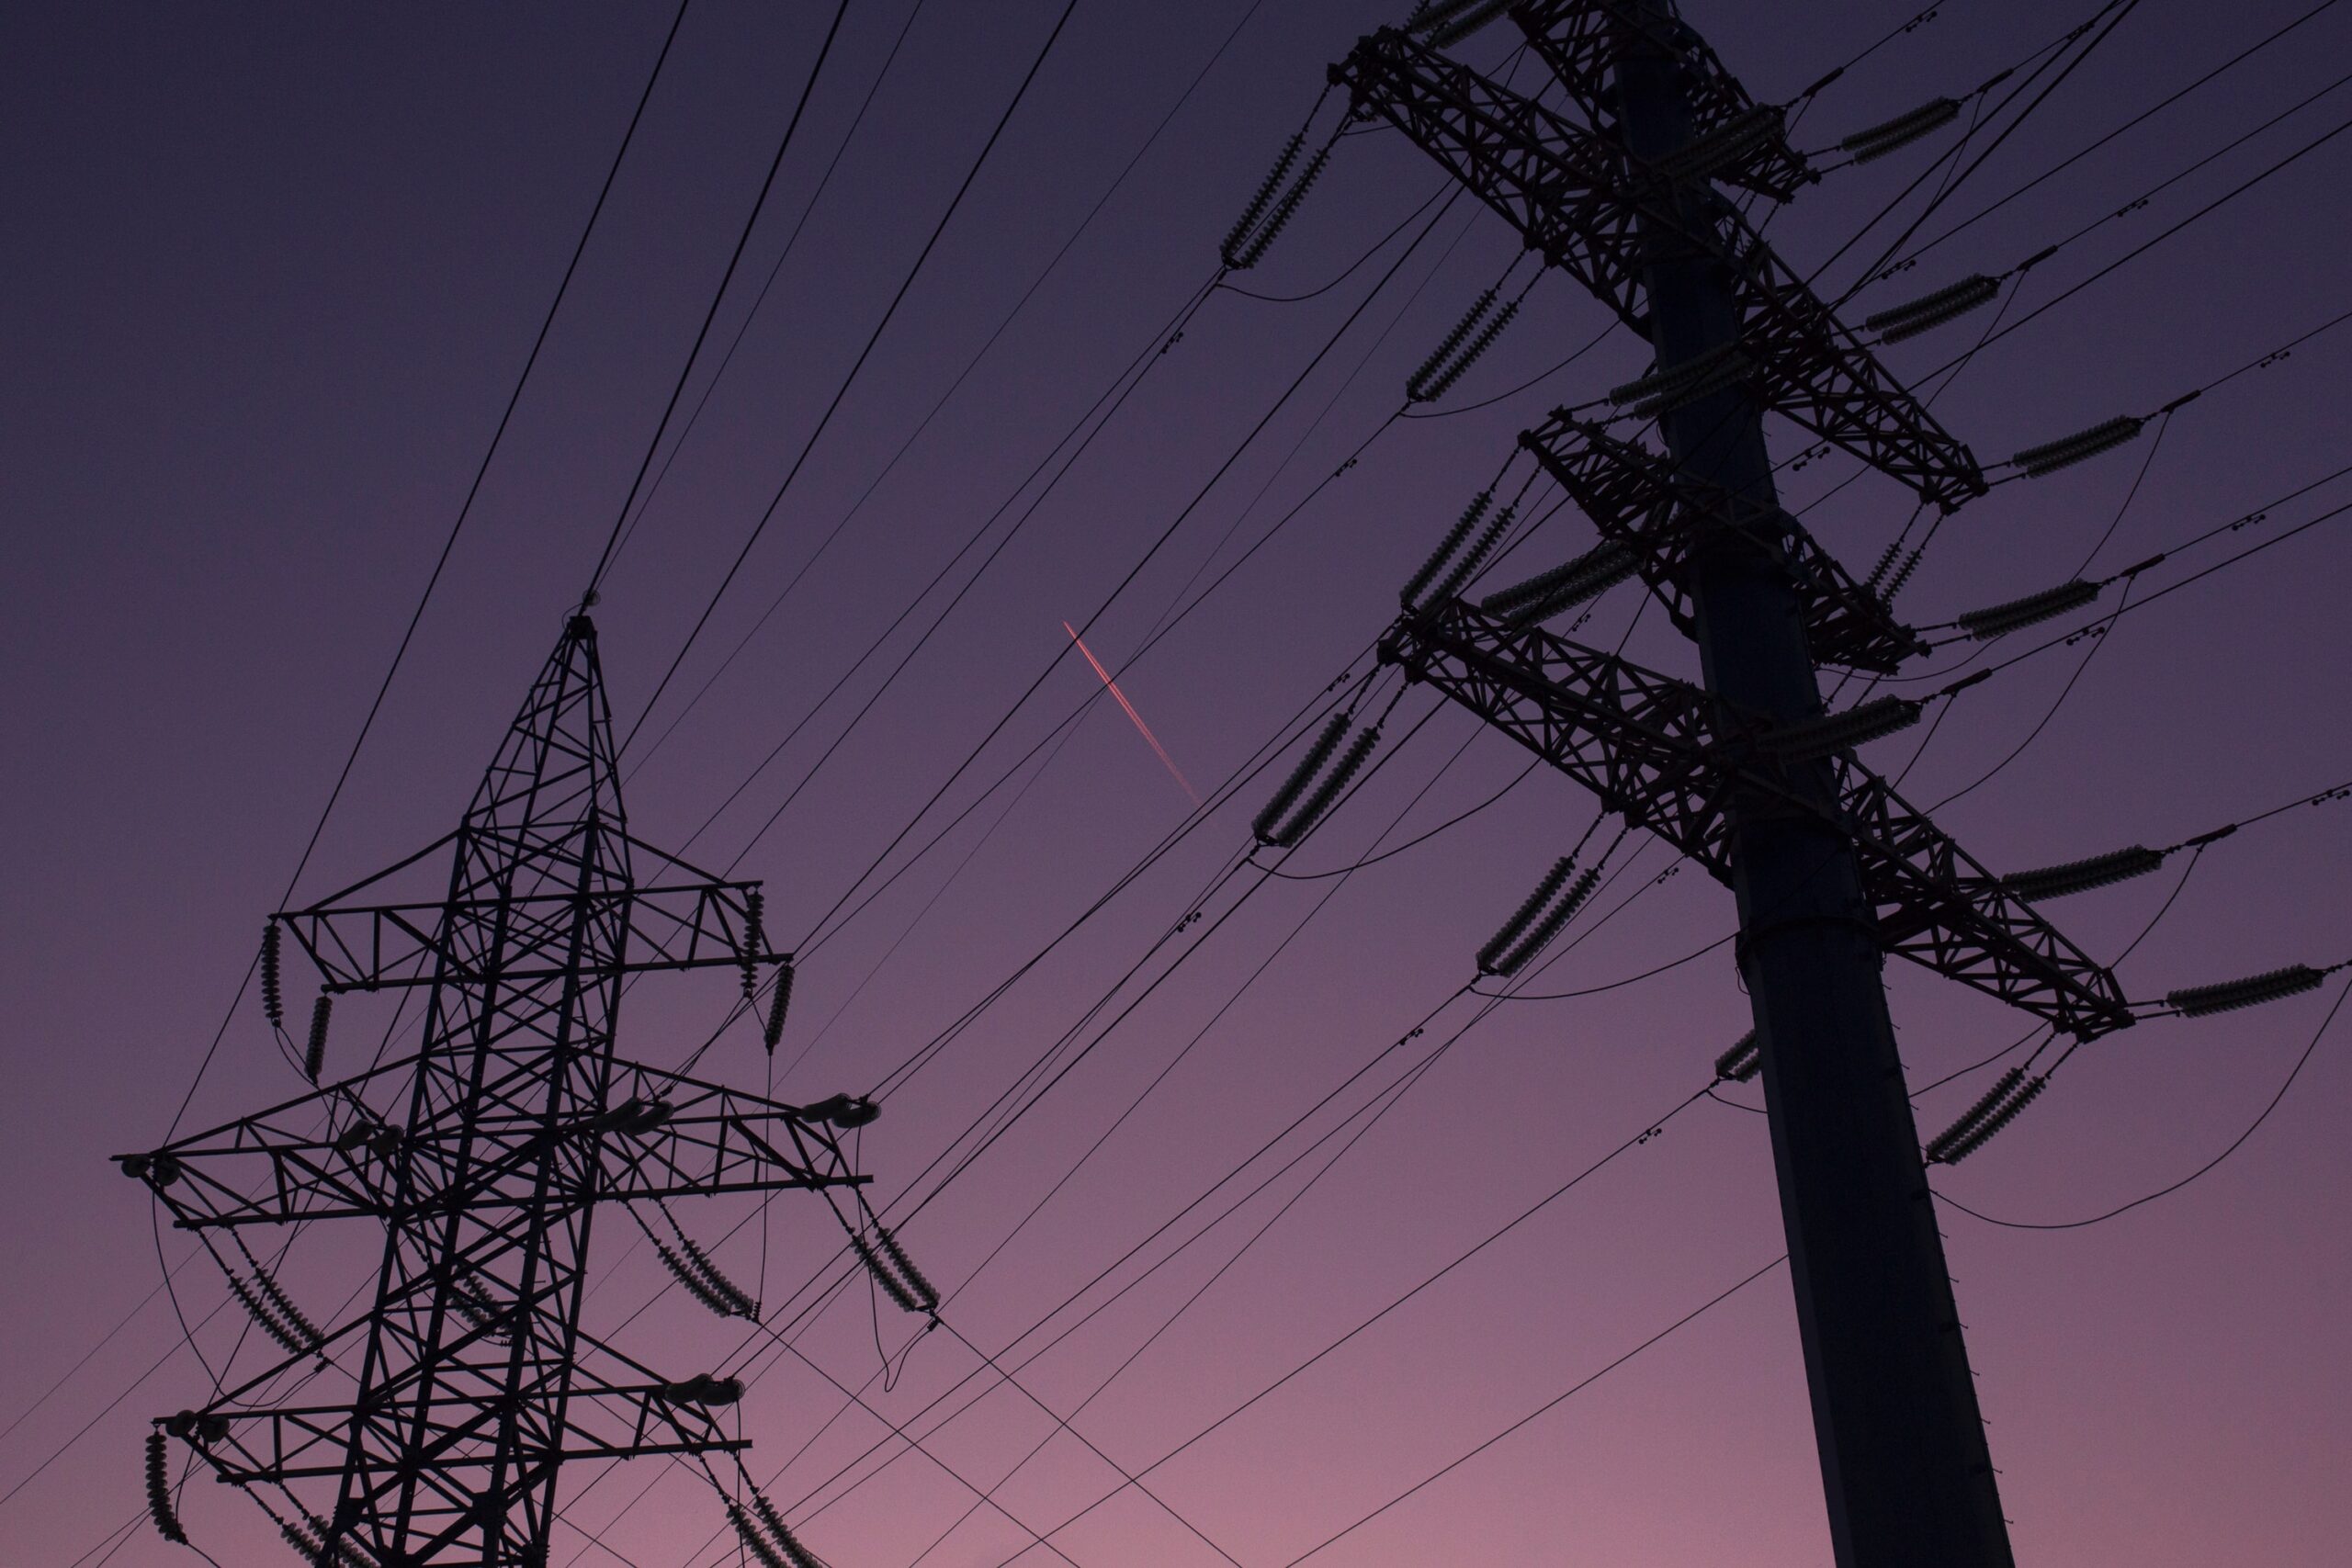 Image of two electricity pylons for wholesale electricity markets.